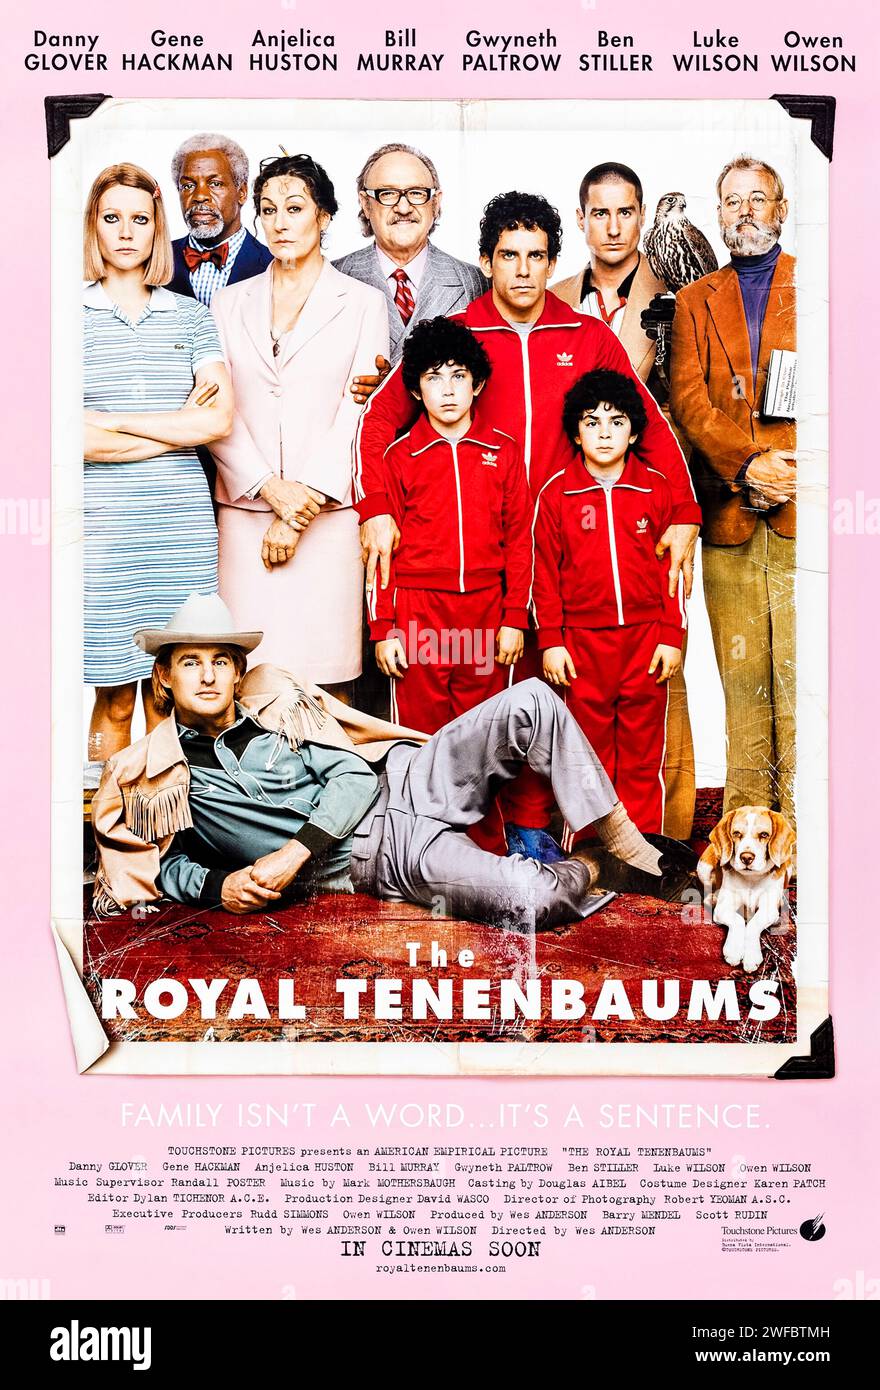 The Royal Tenenbaums (2001) directed by Wes Anderson and starring Gene Hackman, Gwyneth Paltrow, Anjelica Huston and Bill Murray. The eccentric members of a dysfunctional family reluctantly gather under the same roof for various reasons. Photograph of an original 2001 US one sheet poster. ***EDITORIAL USE ONLY*** Credit: BFA / Buena Vista Pictures Stock Photo